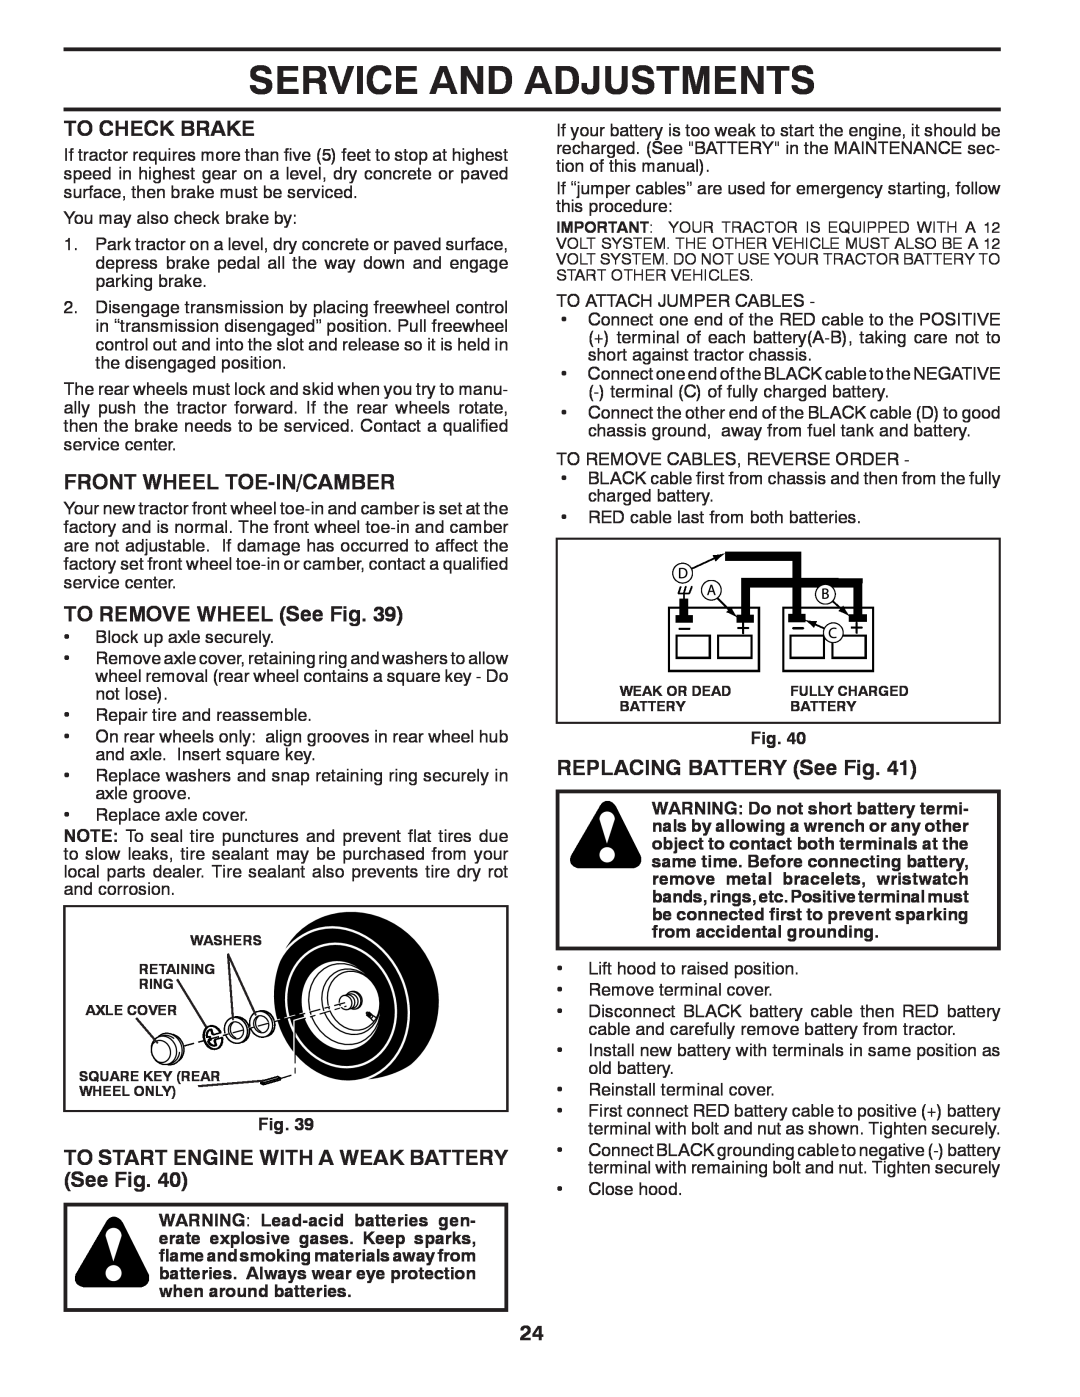 Dixon 434722, D26BH54 manual To Check Brake, Front Wheel Toe-In/Camber, TO REMOVE WHEEL See Fig, REPLACING BATTERY See Fig 